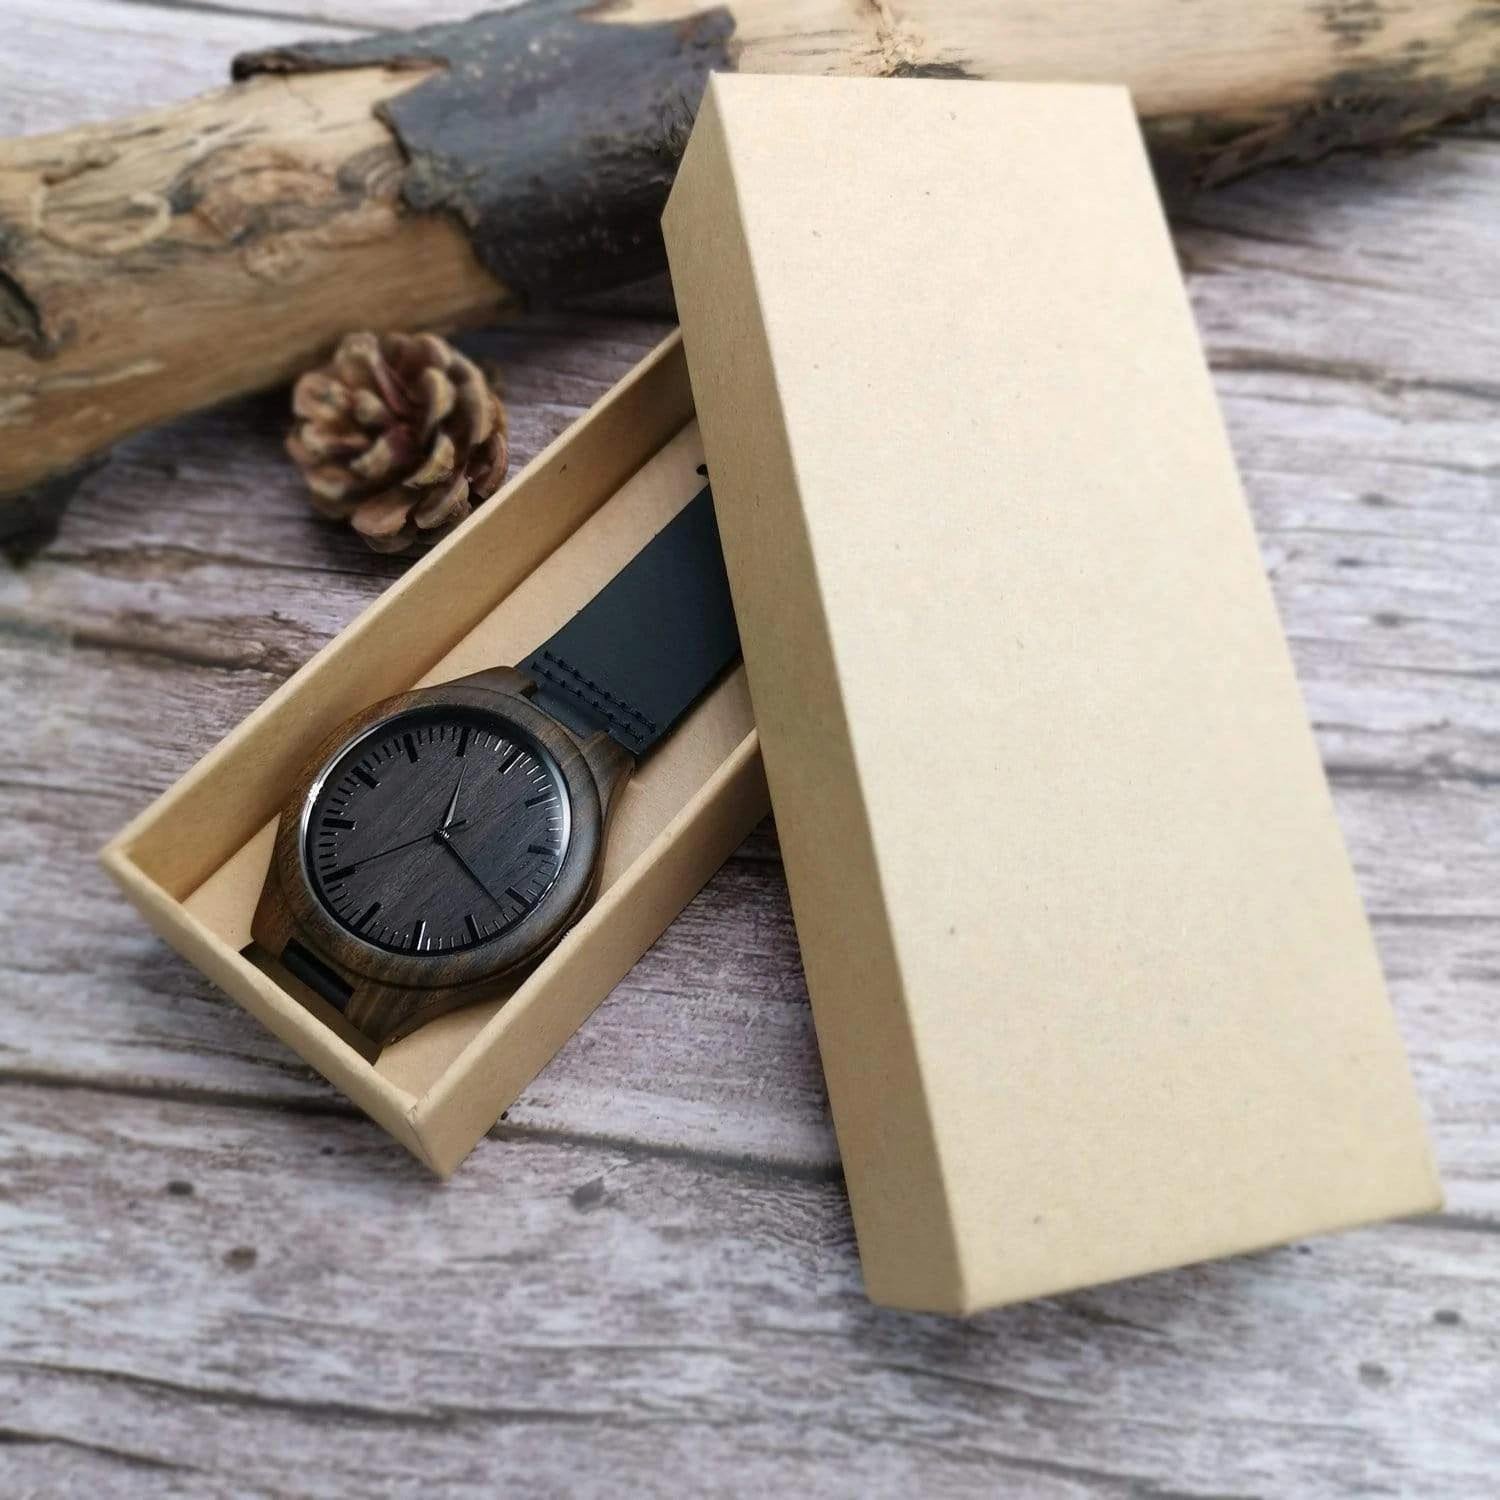 Engraved Wooden Watch Gift For Dad From Son I Love You Always And Forever